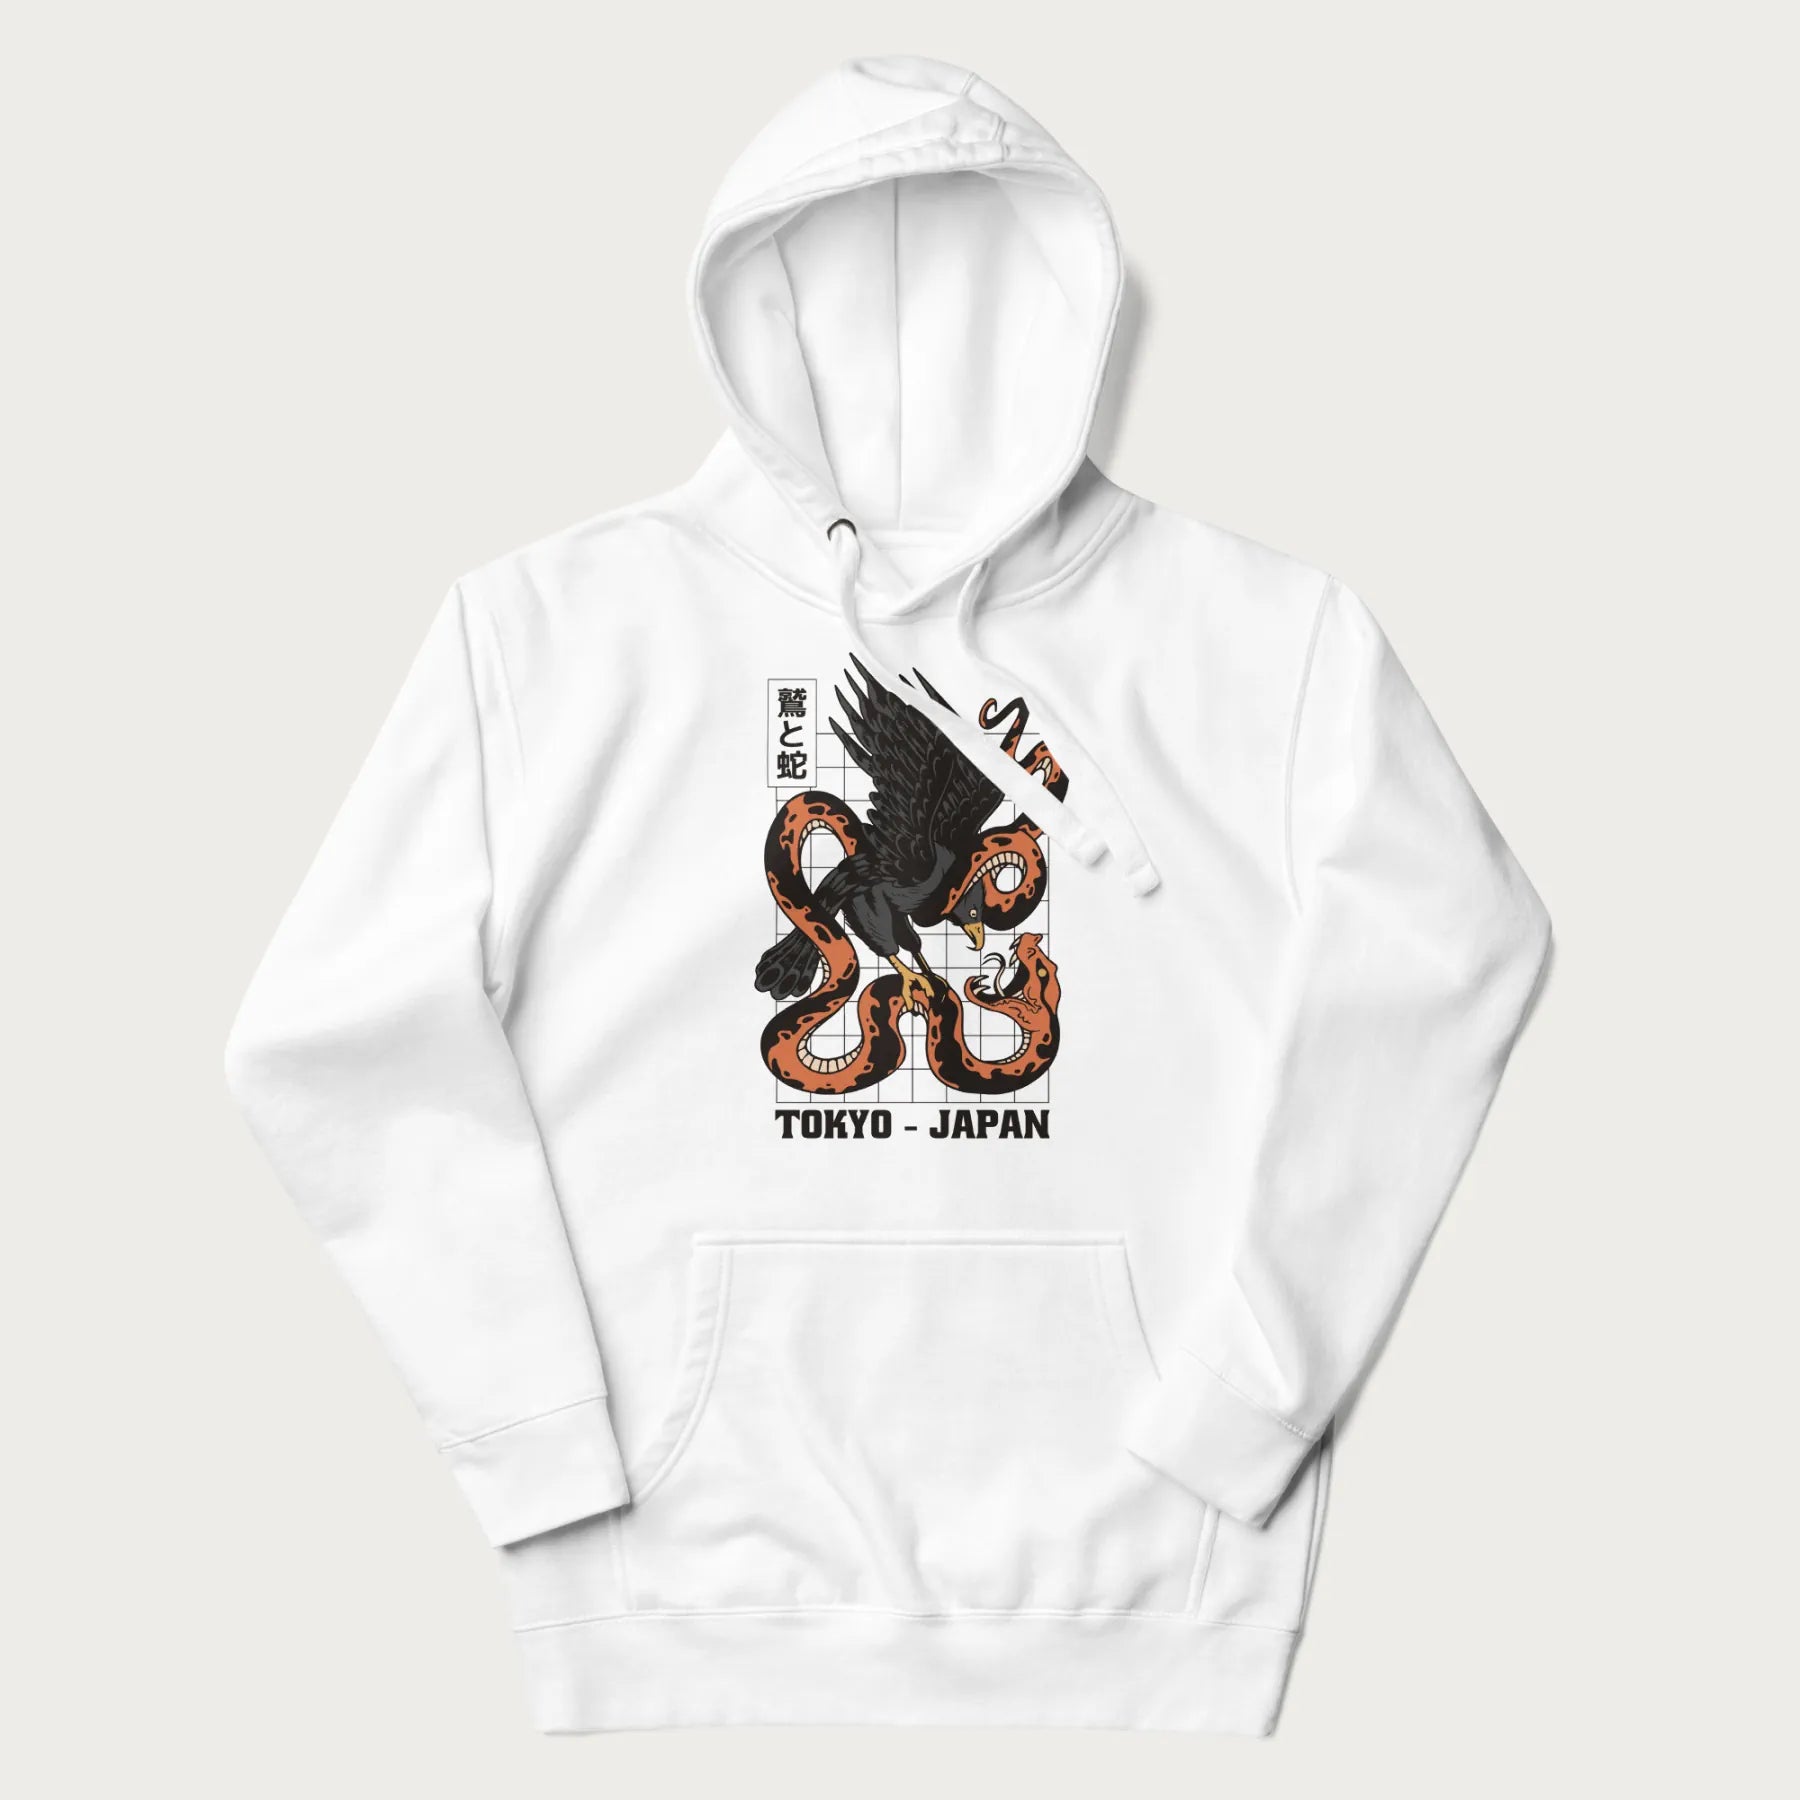 White hoodie with Japanese text and a graphic of an eagle battling a snake, with the text 'Tokyo Japan' underneath.